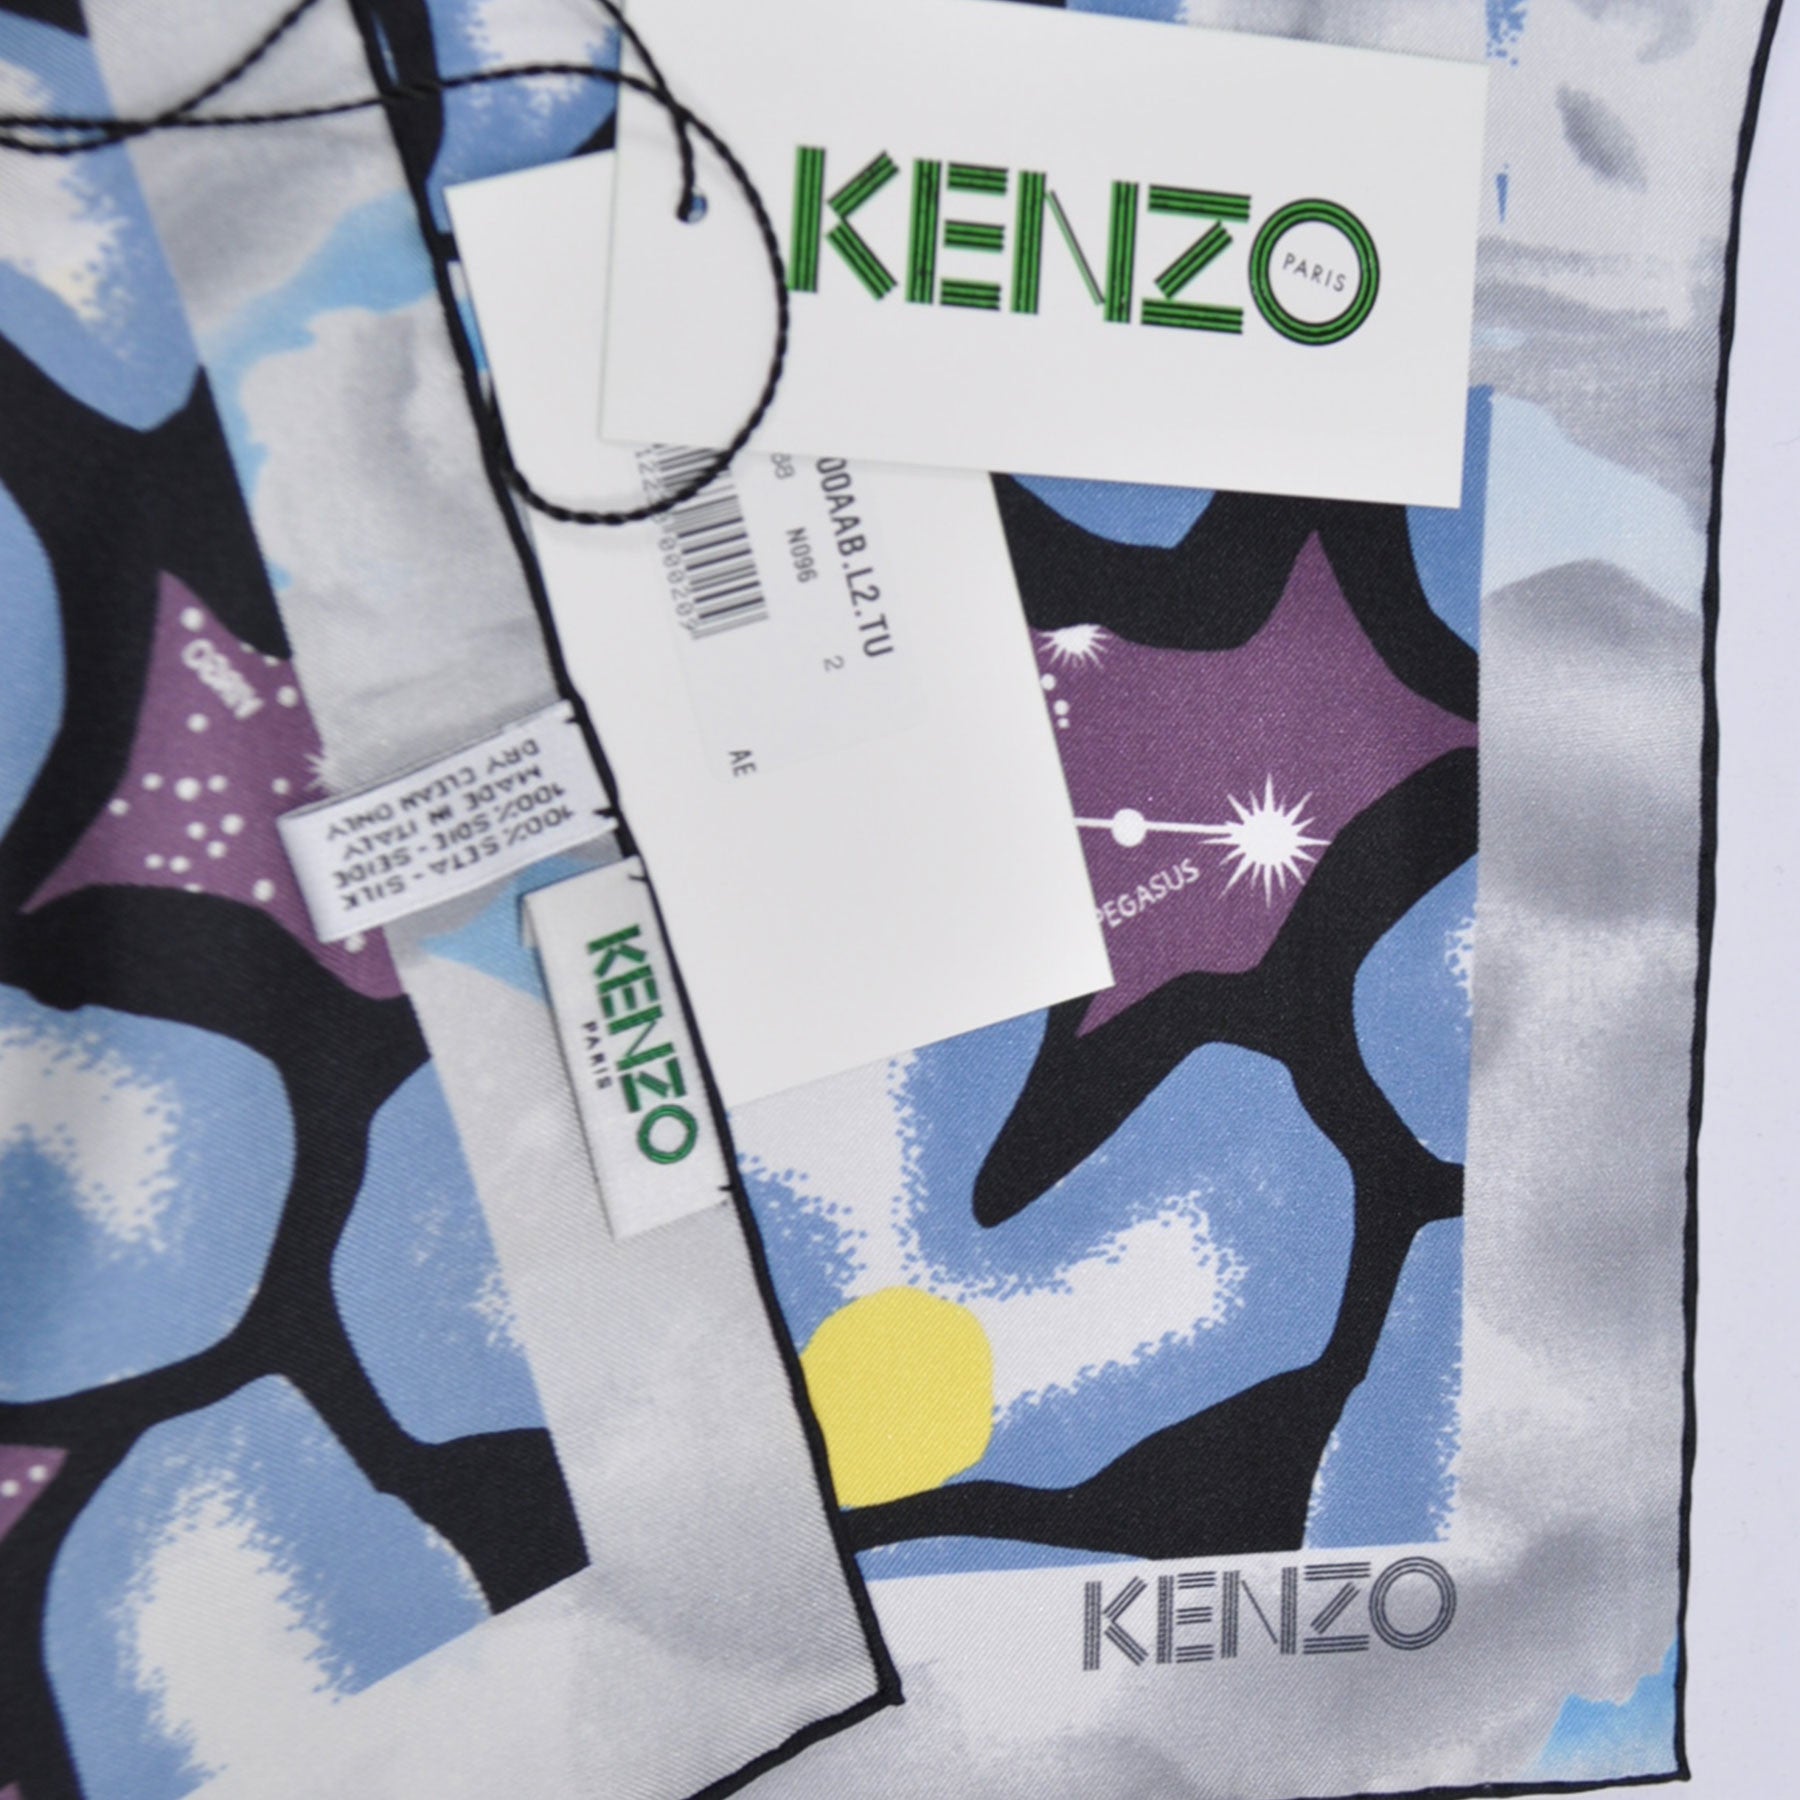 Kenzo Scarf Midnight Blue Floral Horoscope Print Silk Large Square Sca ...